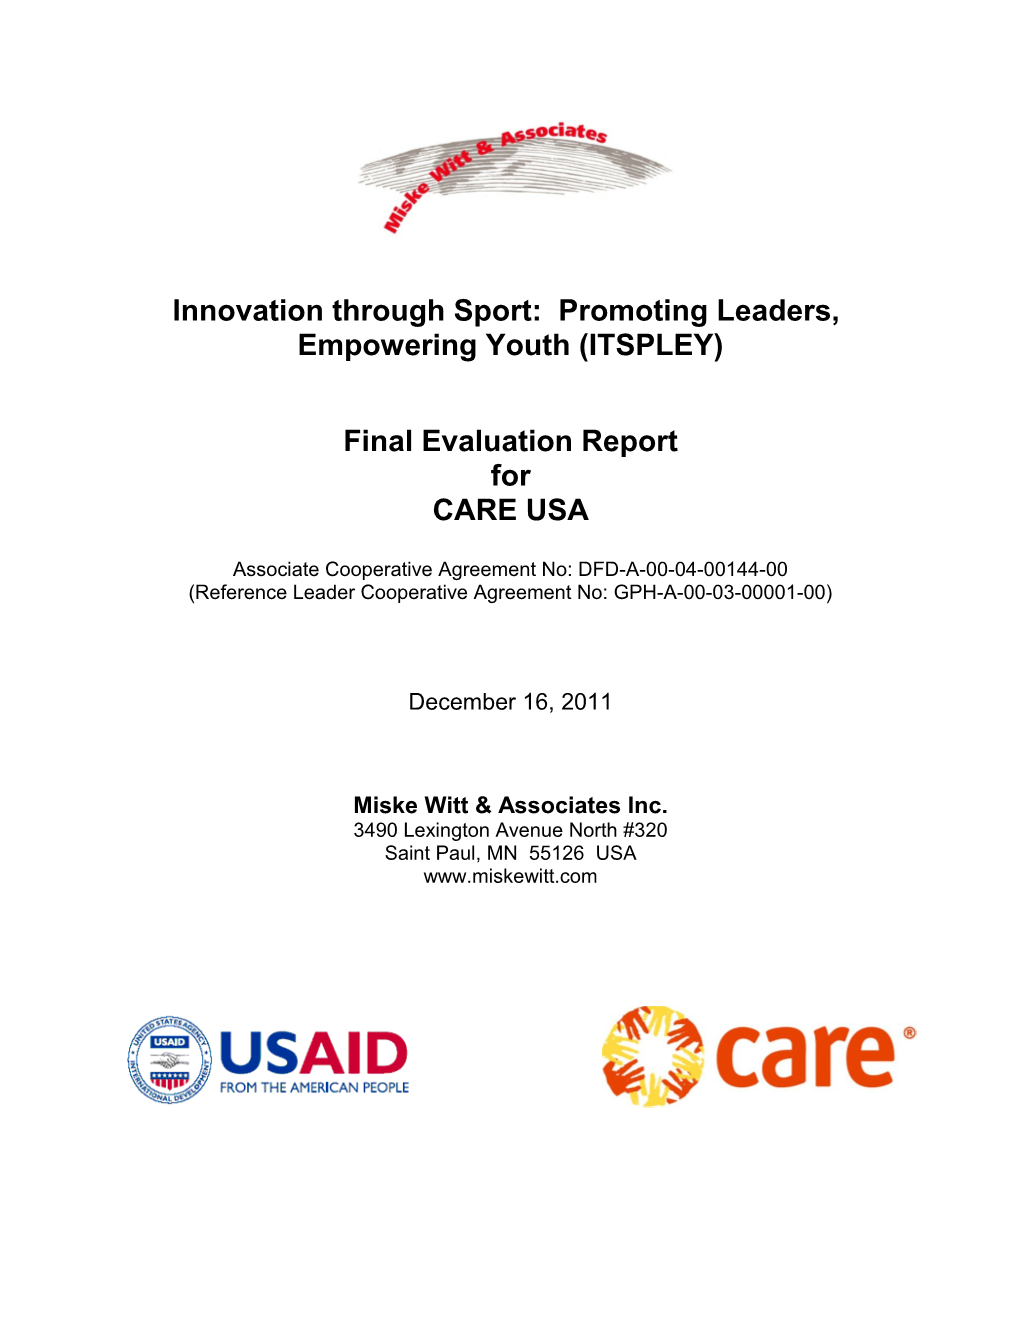 Innovation Through Sport: Promoting Leaders, Empowering Youth: Final Cross-Country Evaluation